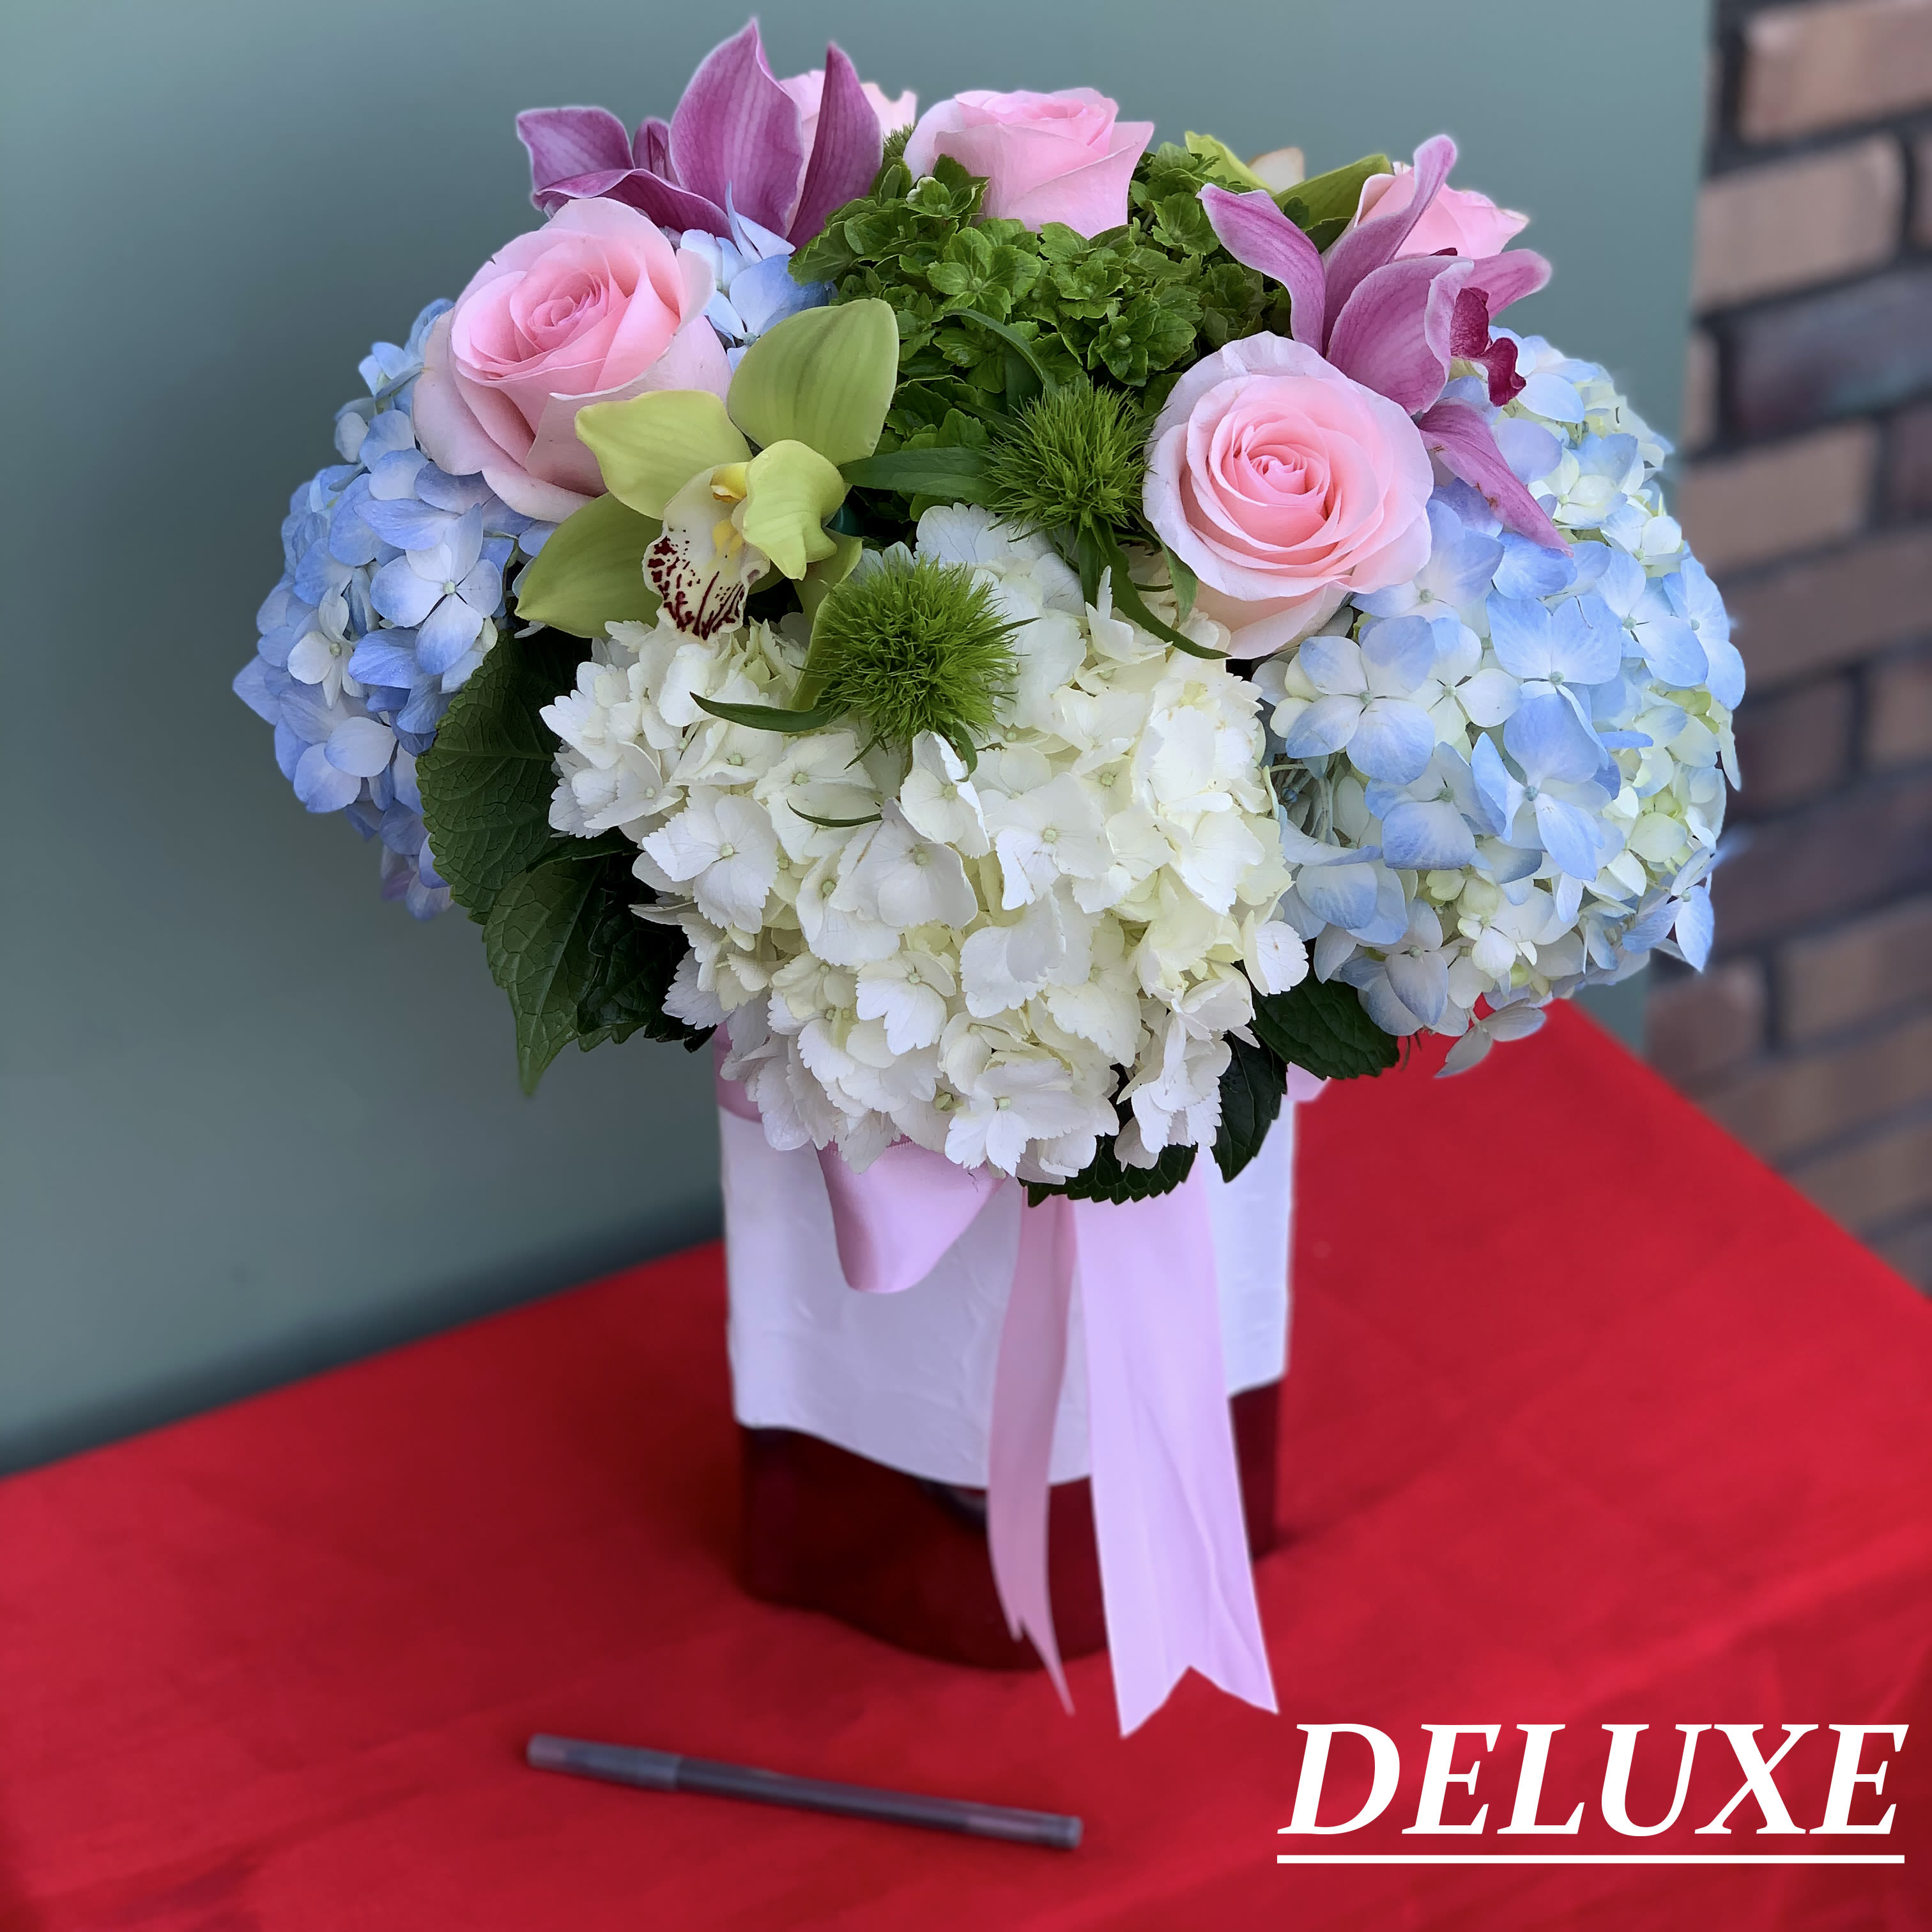 A Cloud of Dreams - Hold a cloud in your hands and feel the dream that is life. Hydrangeas, roses, and orchids pair beautifully with a unique vase sure to impress the special person in your life  NOTE: The photo shown is DELUXE 